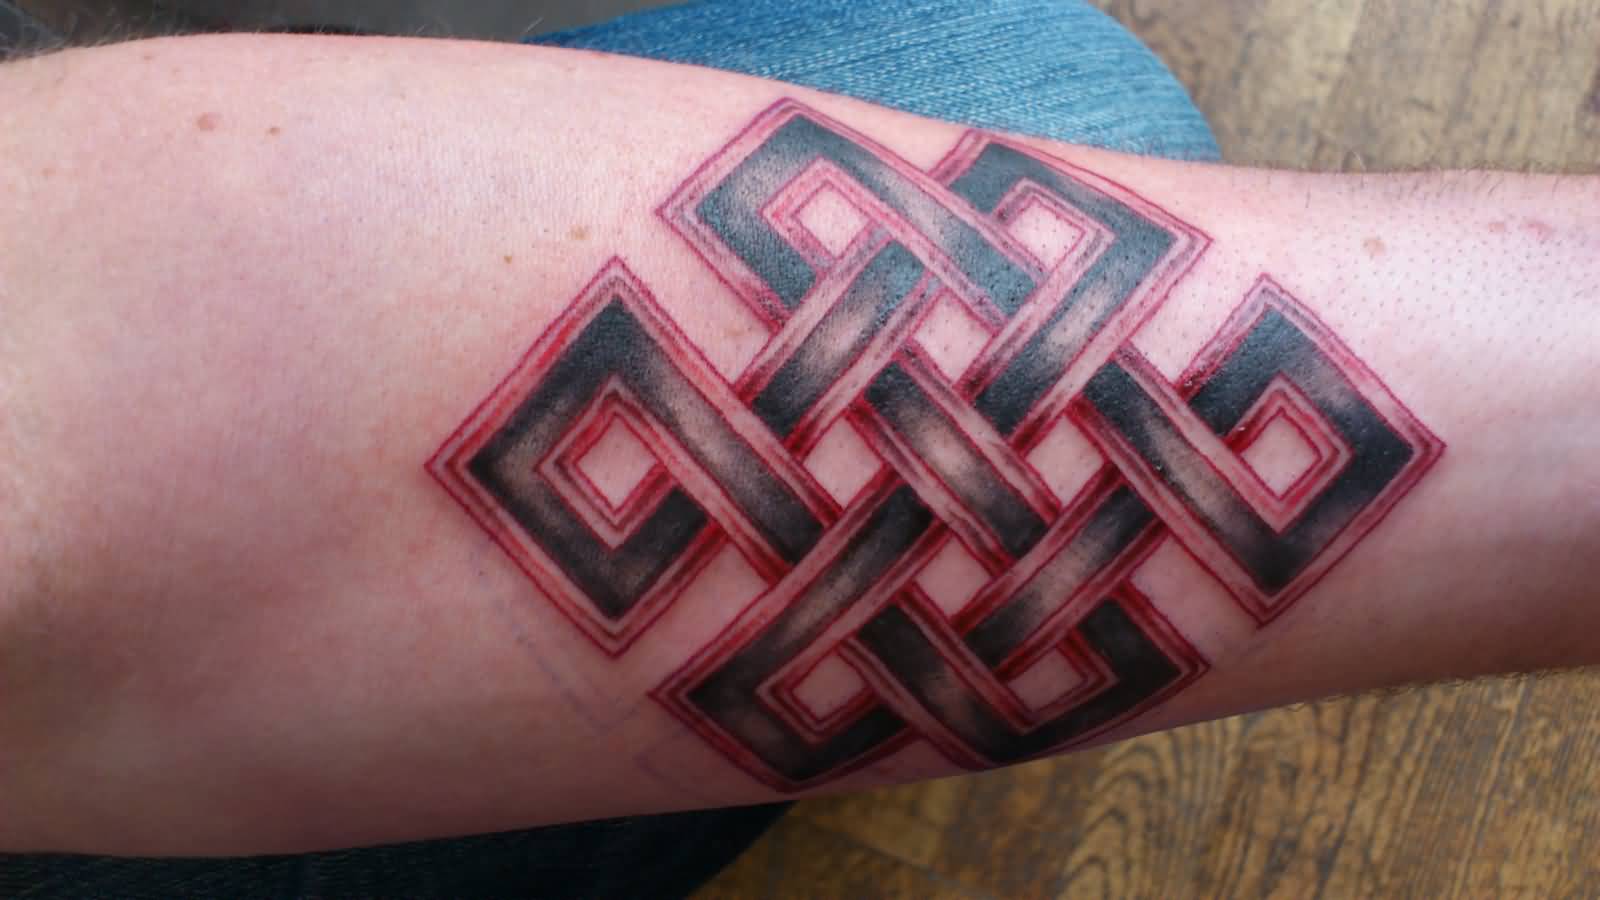 Red And Black Endless Knot Tattoo On Arm